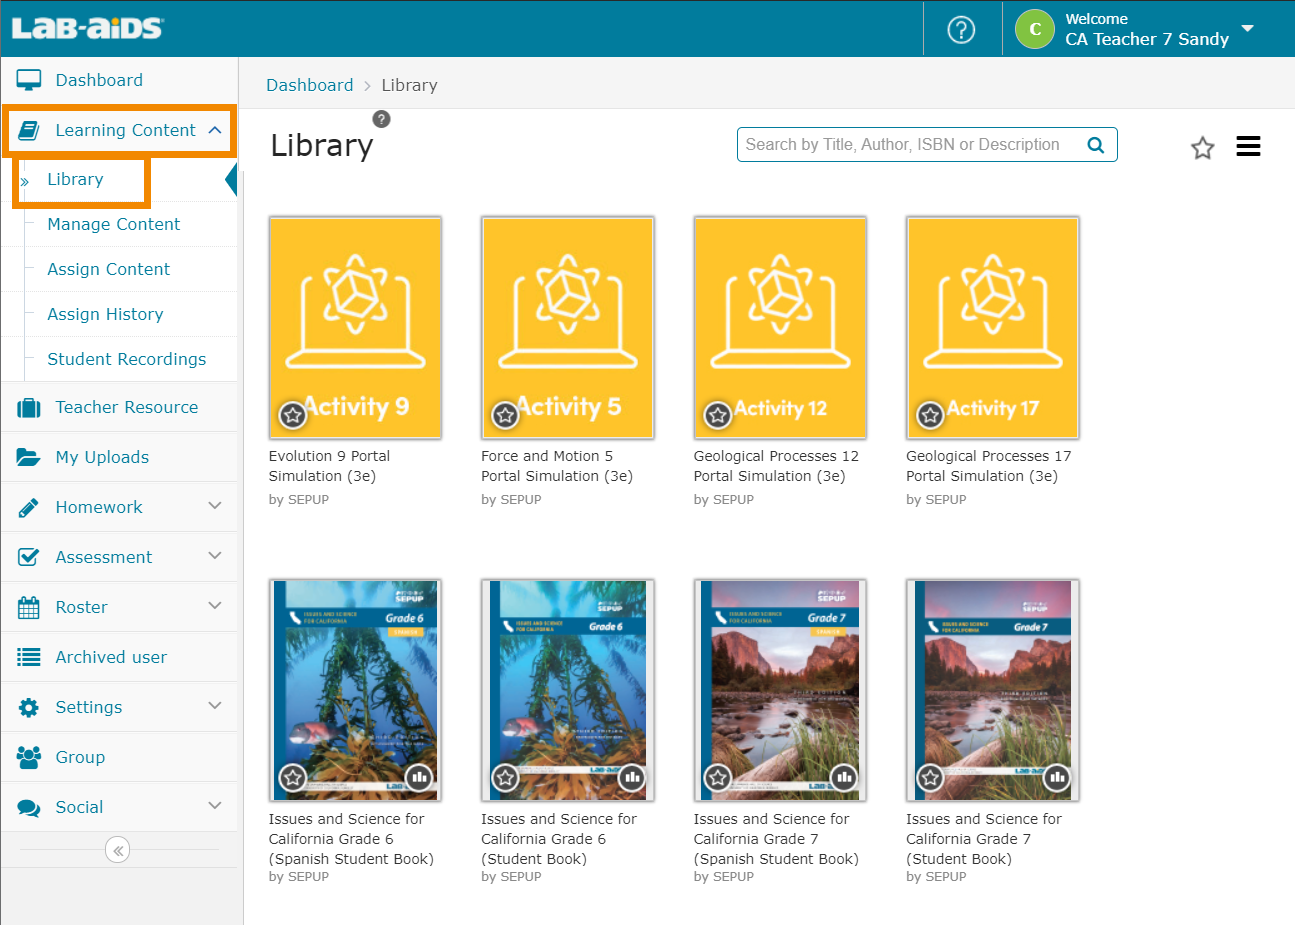 View the student products by clicking on Learning Content, and then Library.  Portal Simulations are in yellow, and student books are labeled with their respective grade.